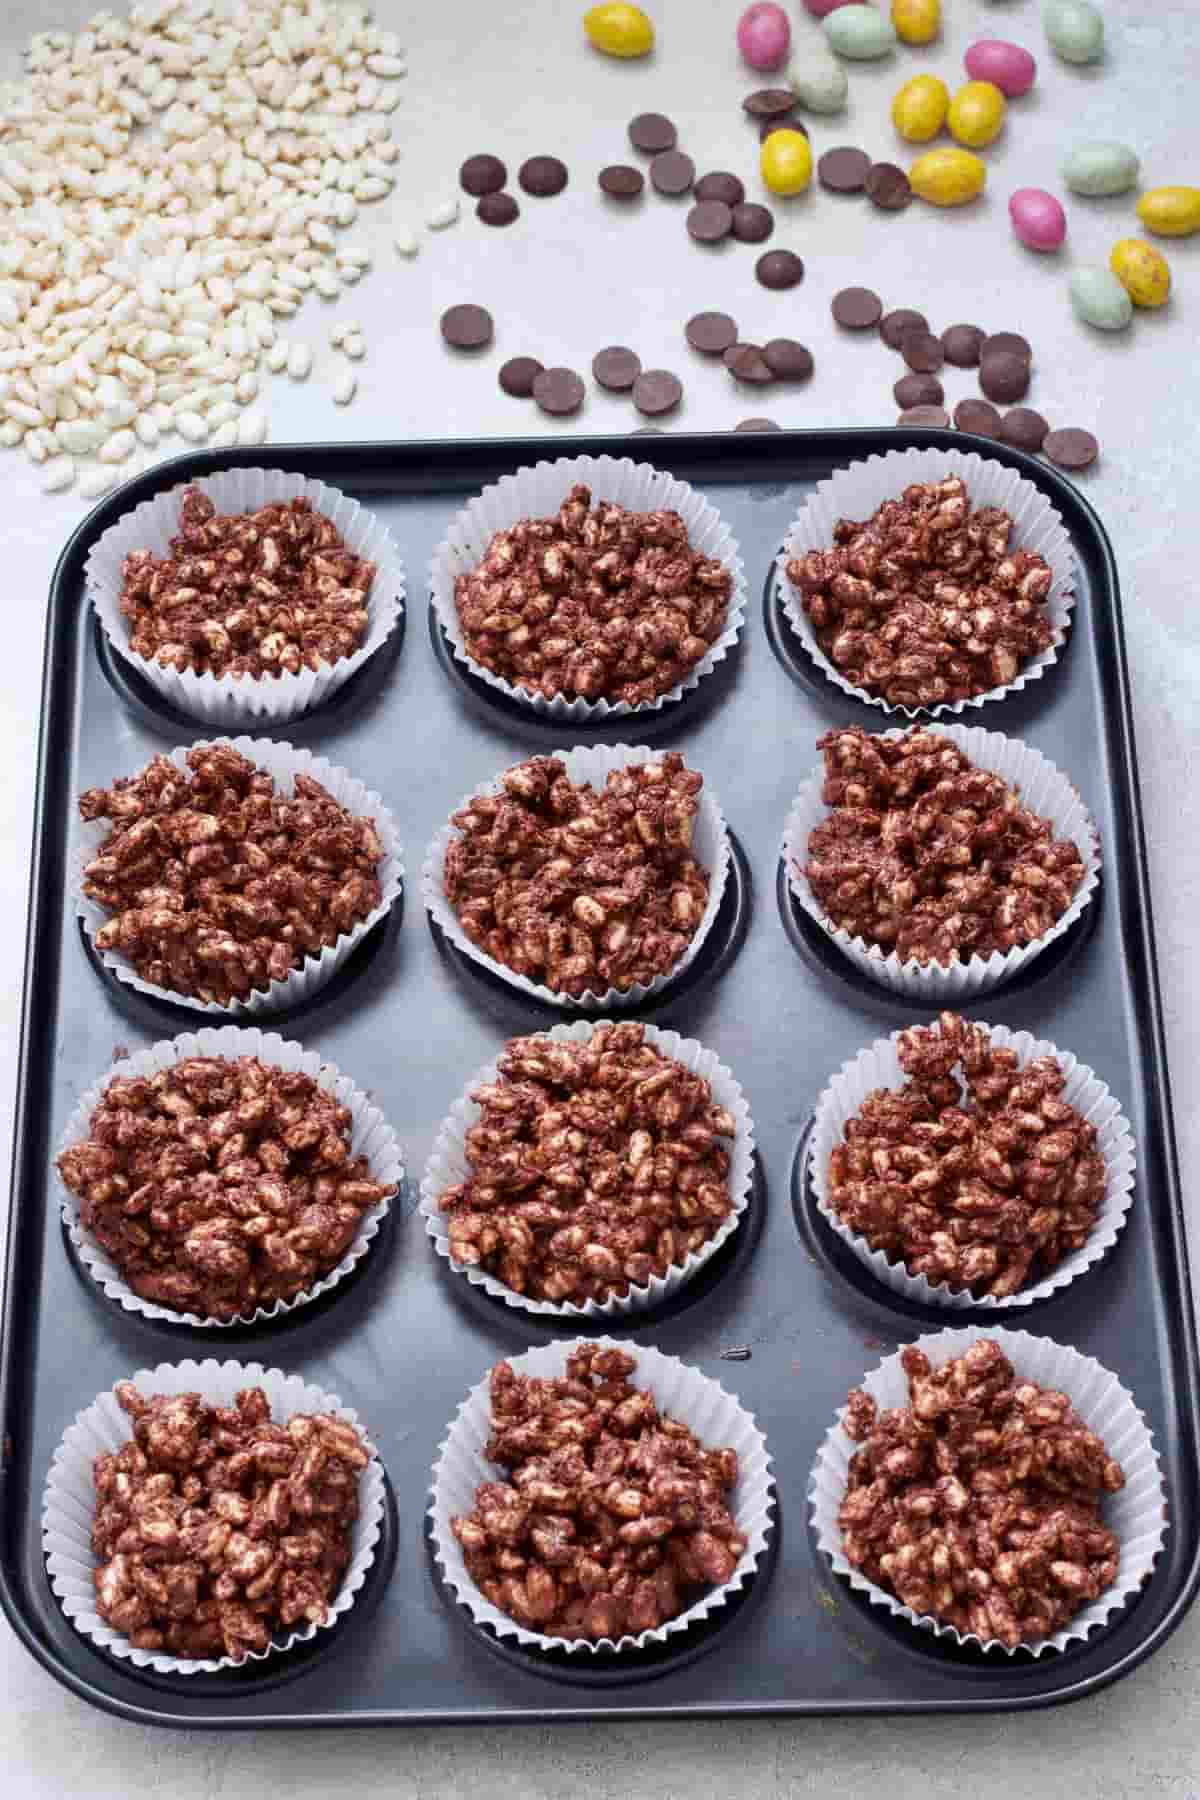 Tray filled with chocolate nests in cupcake cases.